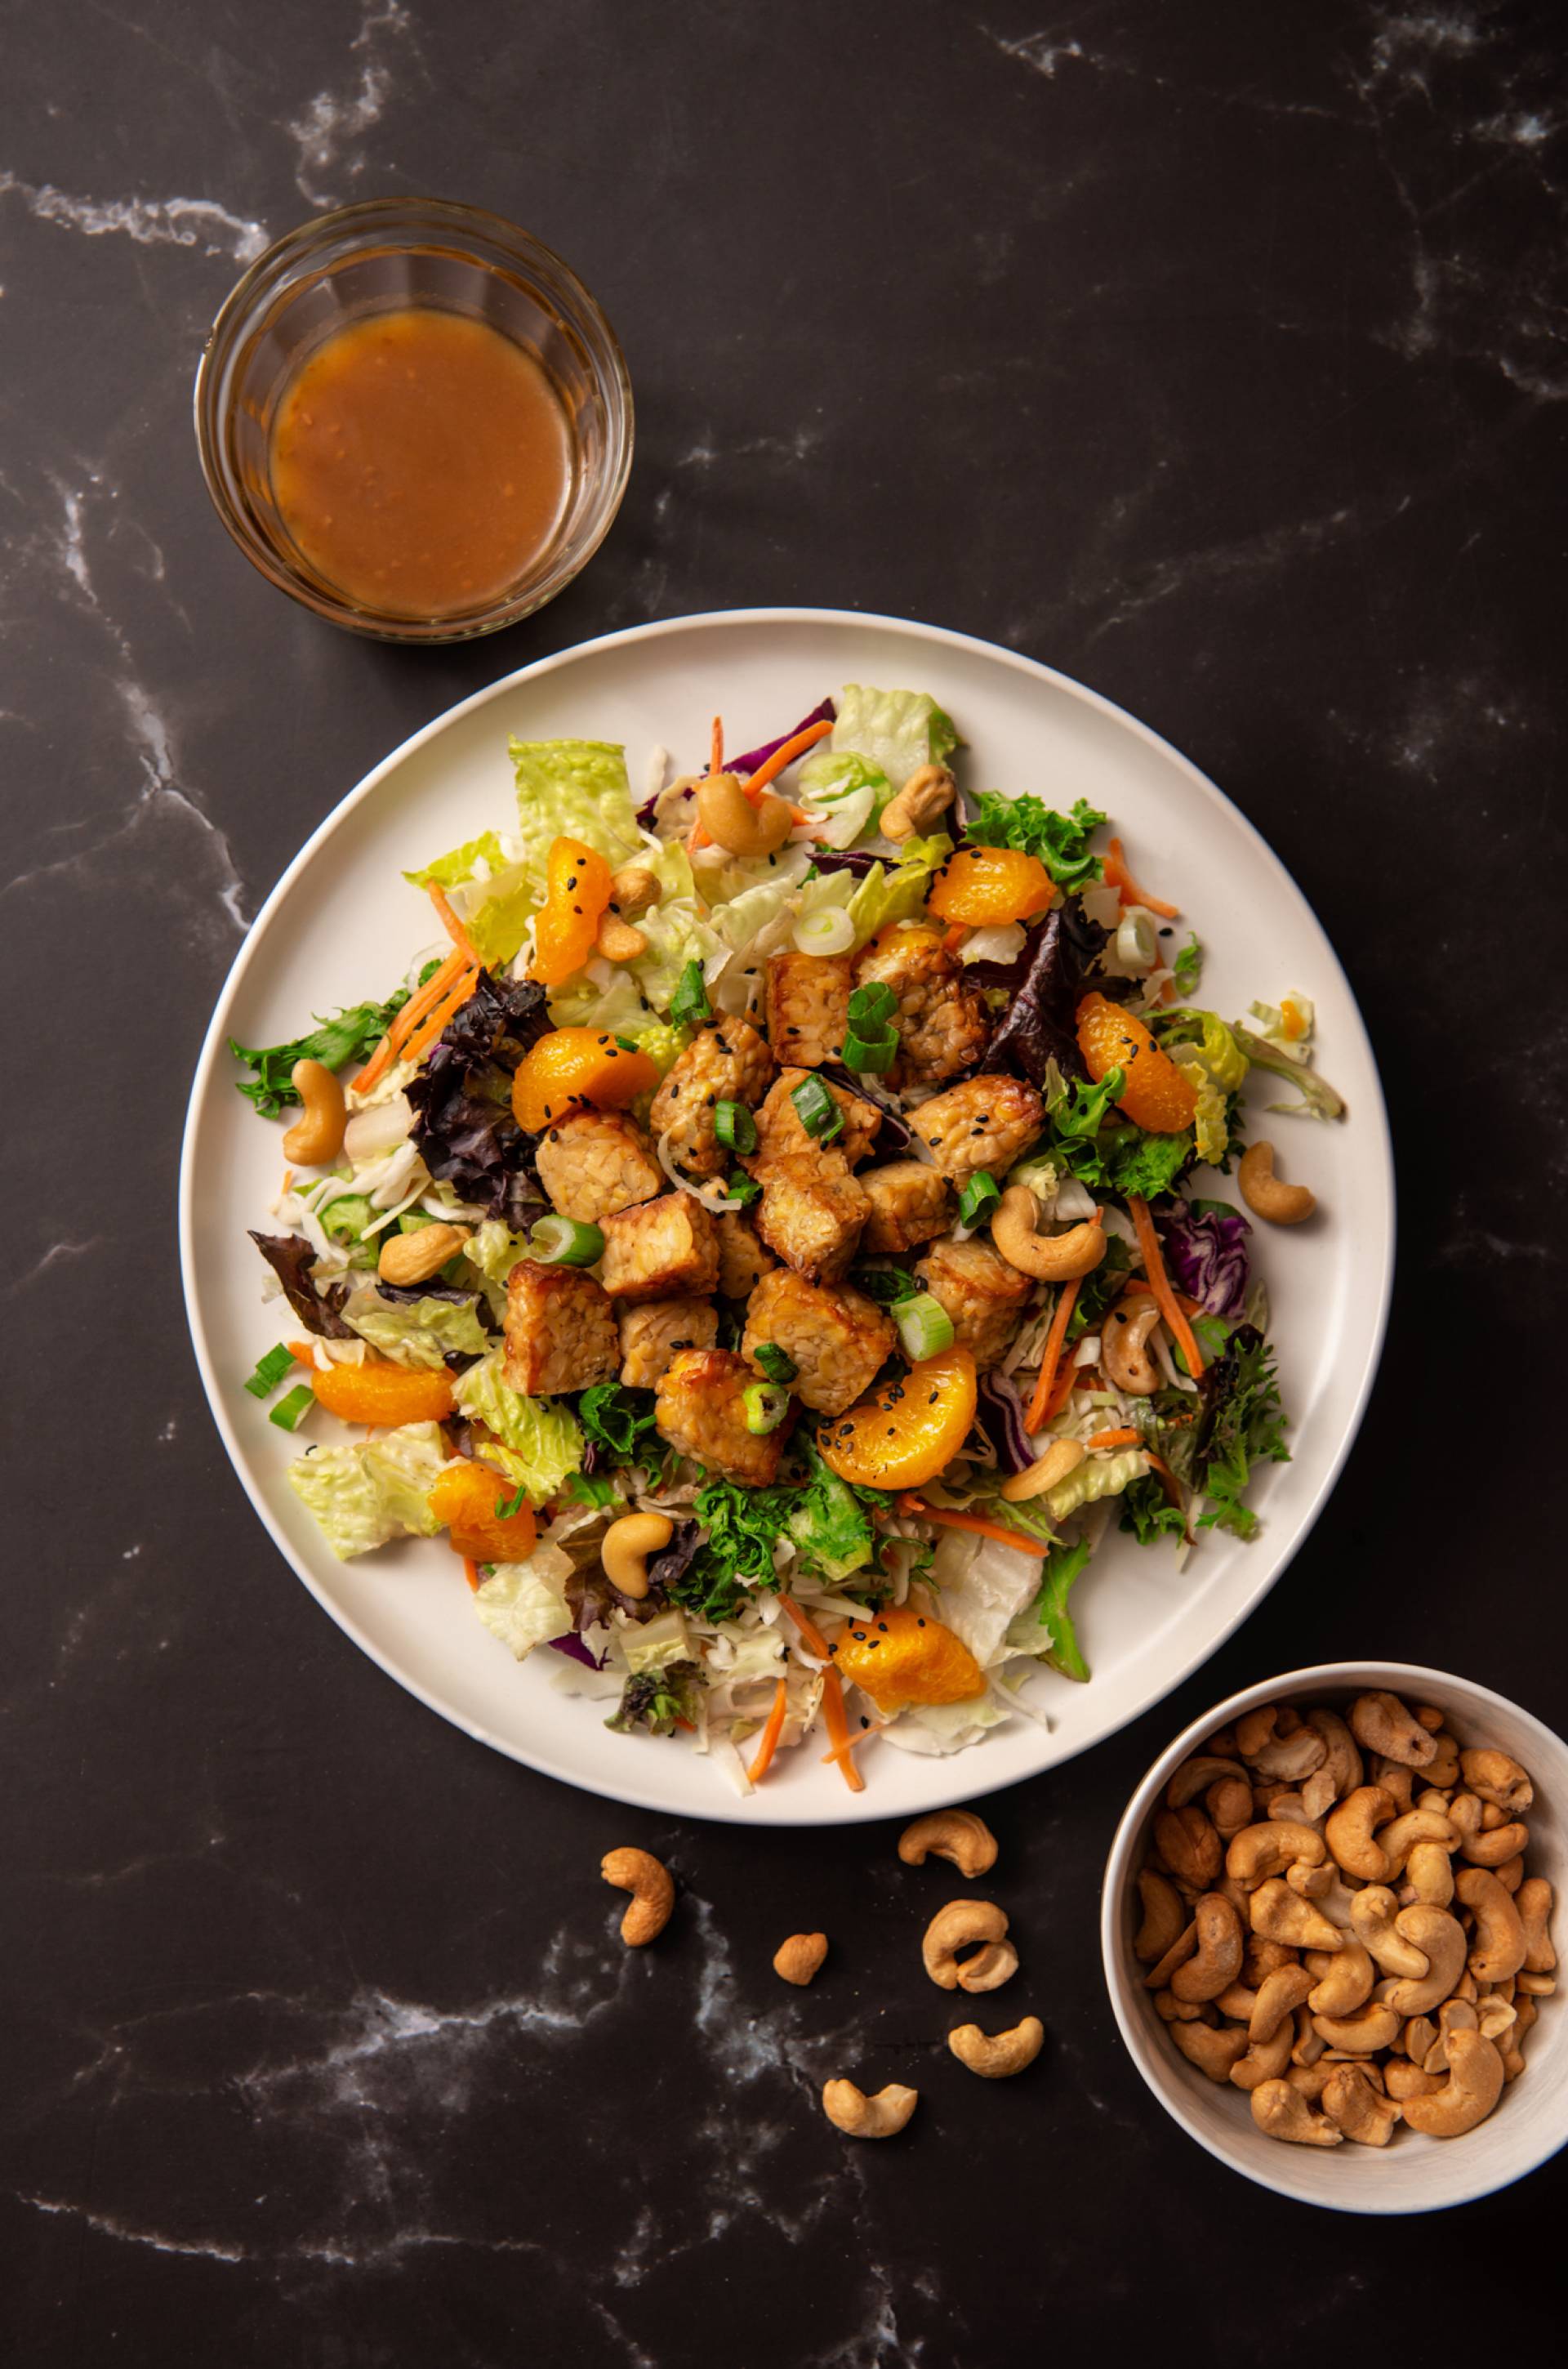 Ginger Cashew Chickpea Salad (MEAT FREE)